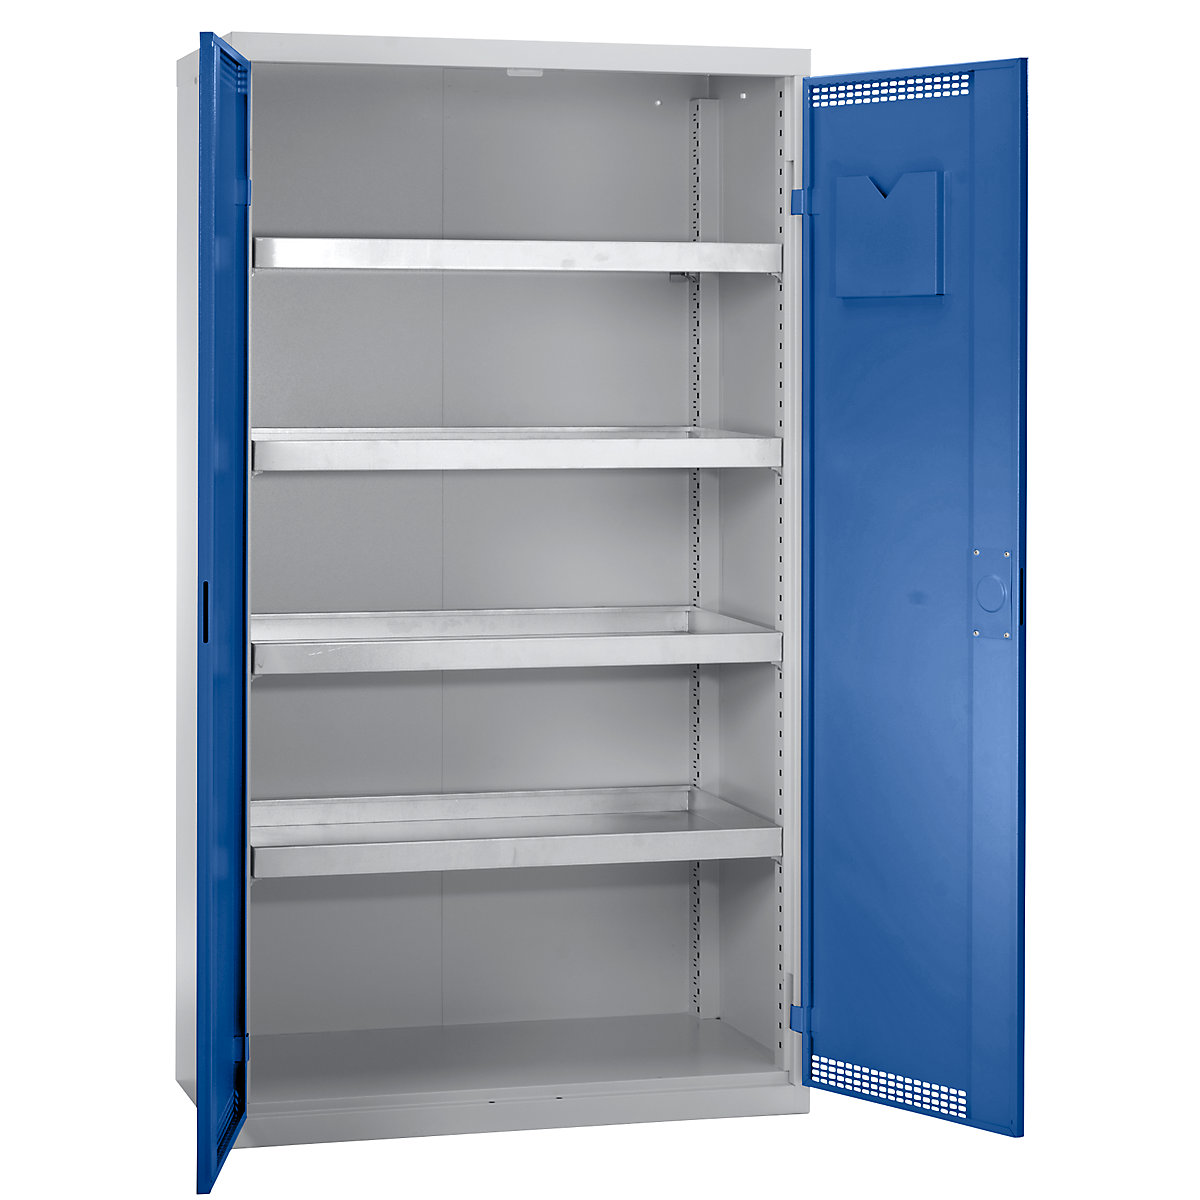 Environmental cupboard with door perforations, HxWxD 1800 x 1000 x 500 mm, 4 tray shelves, light grey / gentian blue-4